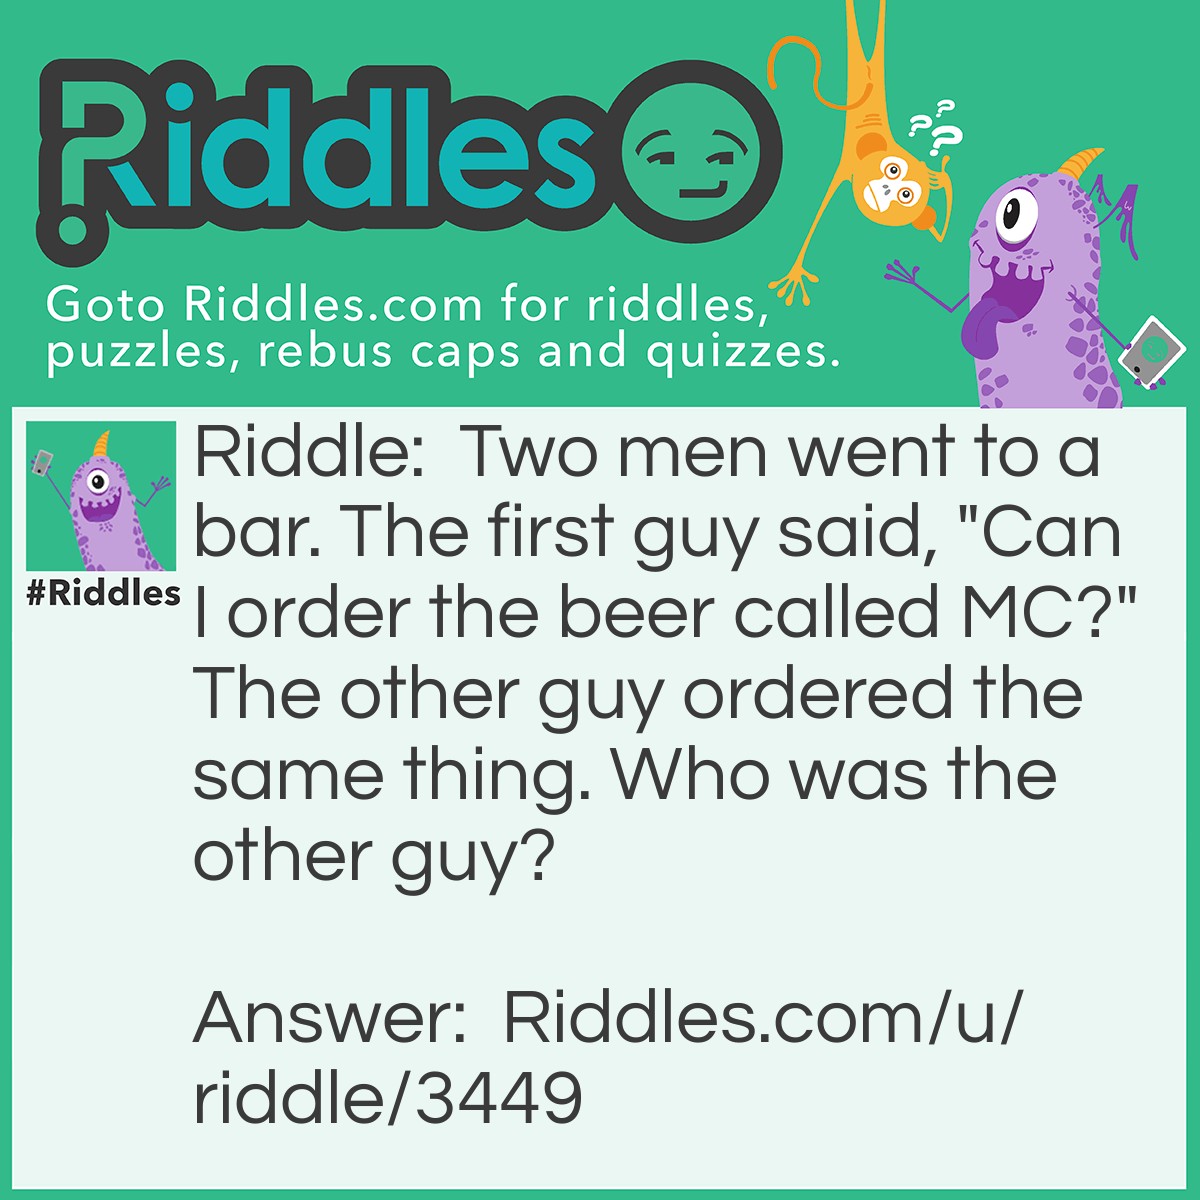 Riddle: Two men went to a bar. The first guy said, "Can I order the beer called MC?" The other guy ordered the same thing. Who was the other guy? Answer: Since the other guy wanted MC too, he is Albert Einstein .